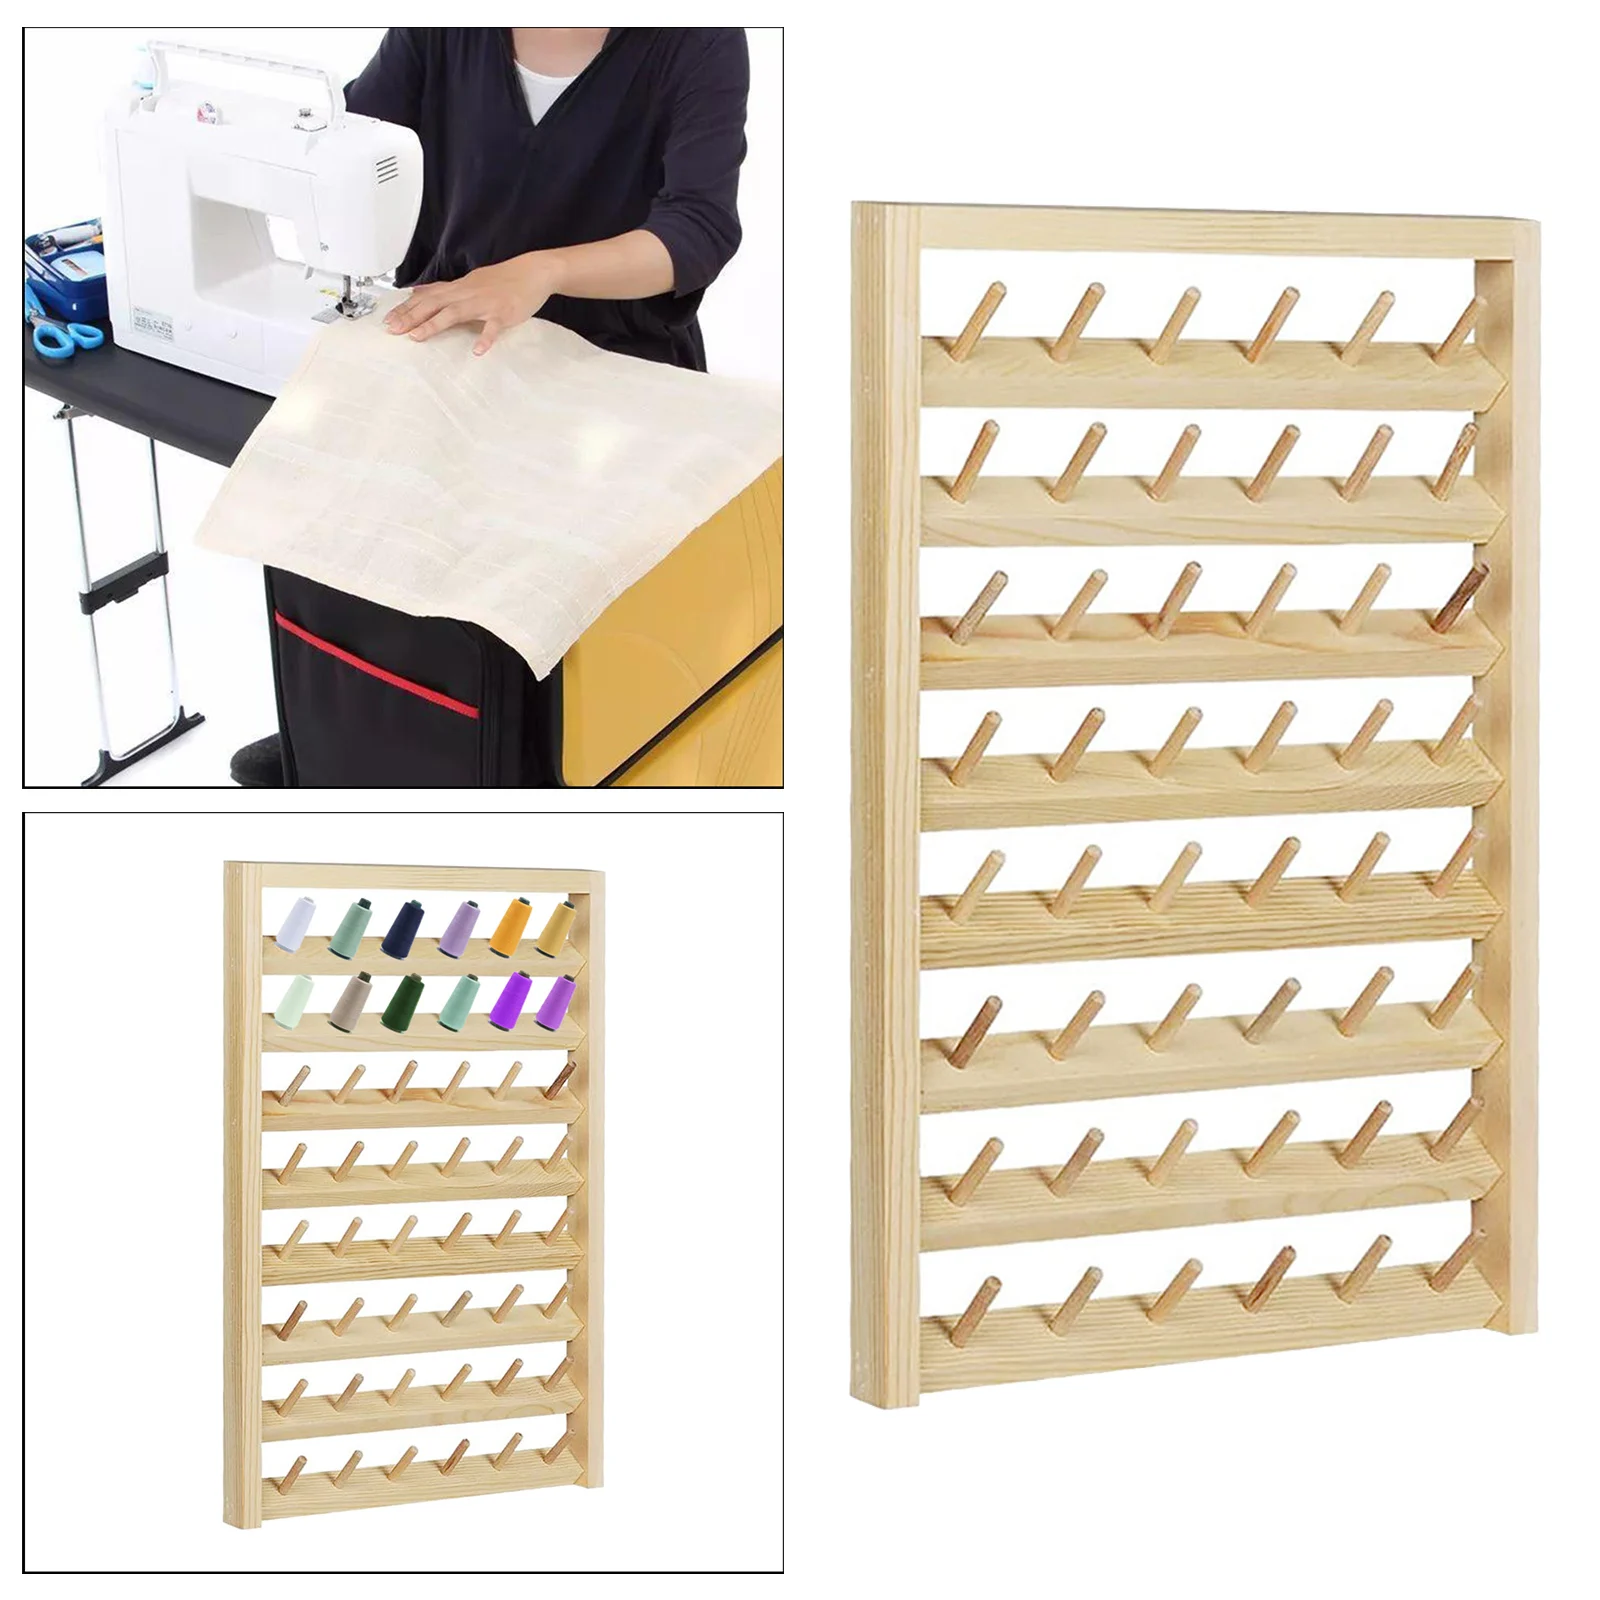 Multi-Spool Sewing Thread Rack, Wall-Mounted Sewing Thead Holder, Organizer Shelf for Mini Sewing Quilting Jewelry Embroidery